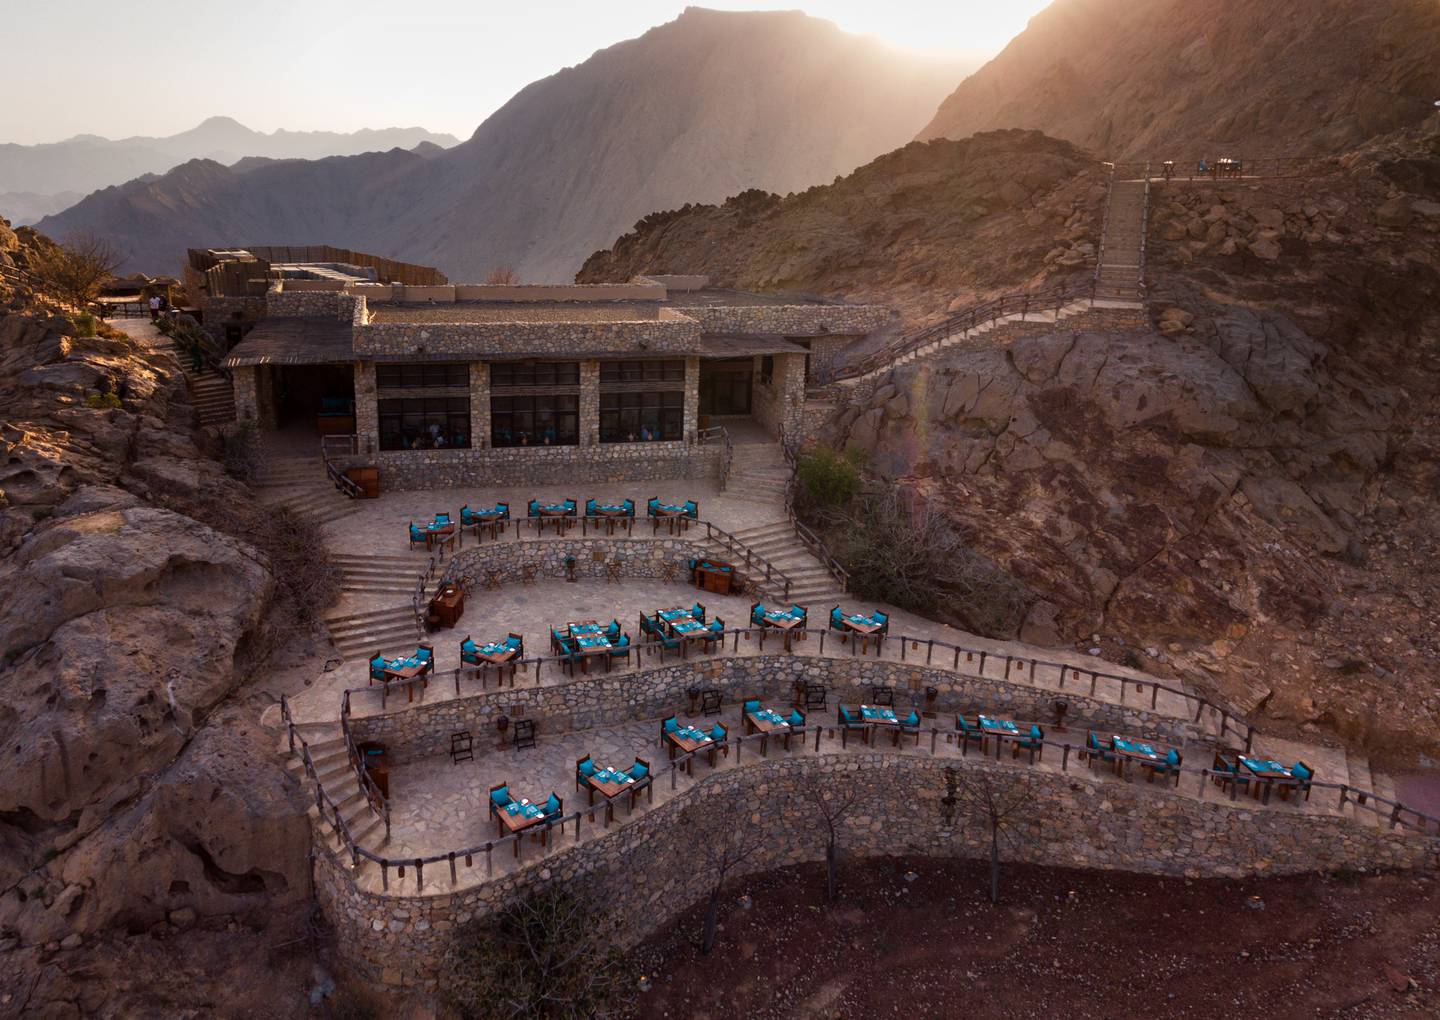 Six Senses Zighy Bay offers a mountain escape just two hours from Dubai. Photo: Six Senses Zighy Bay